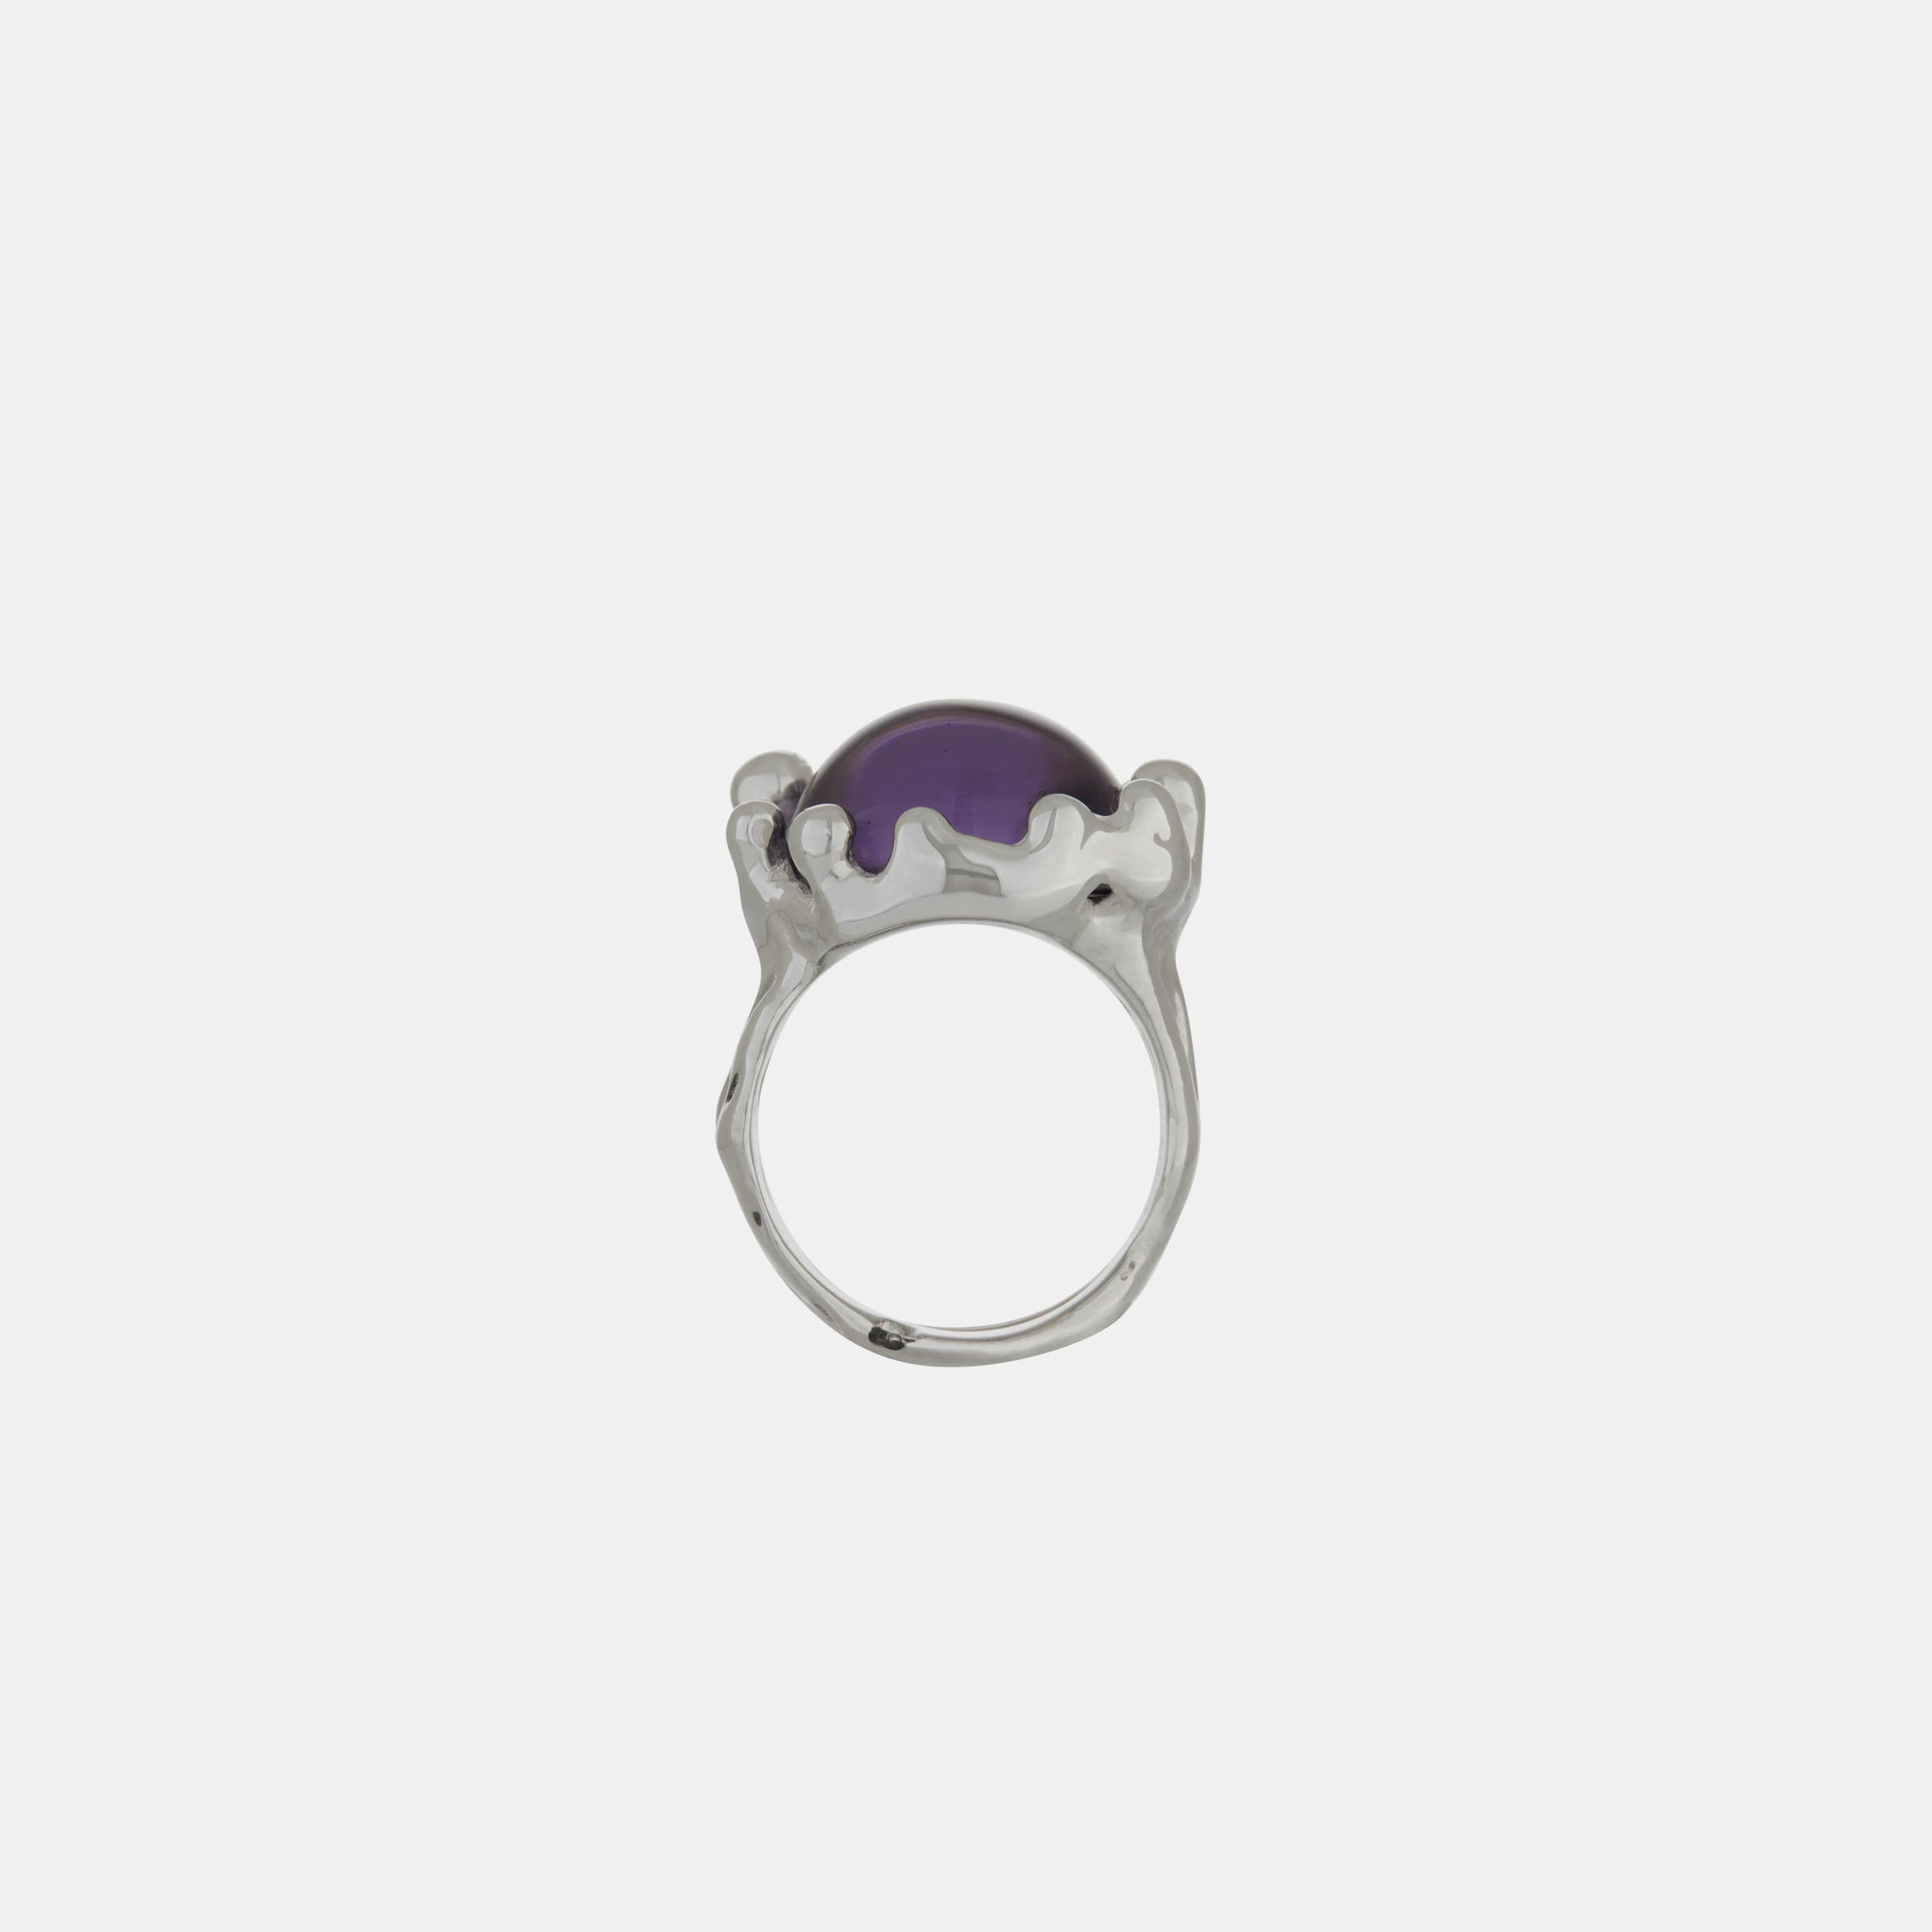 Side detail photo of the Magician Ring - Grape.